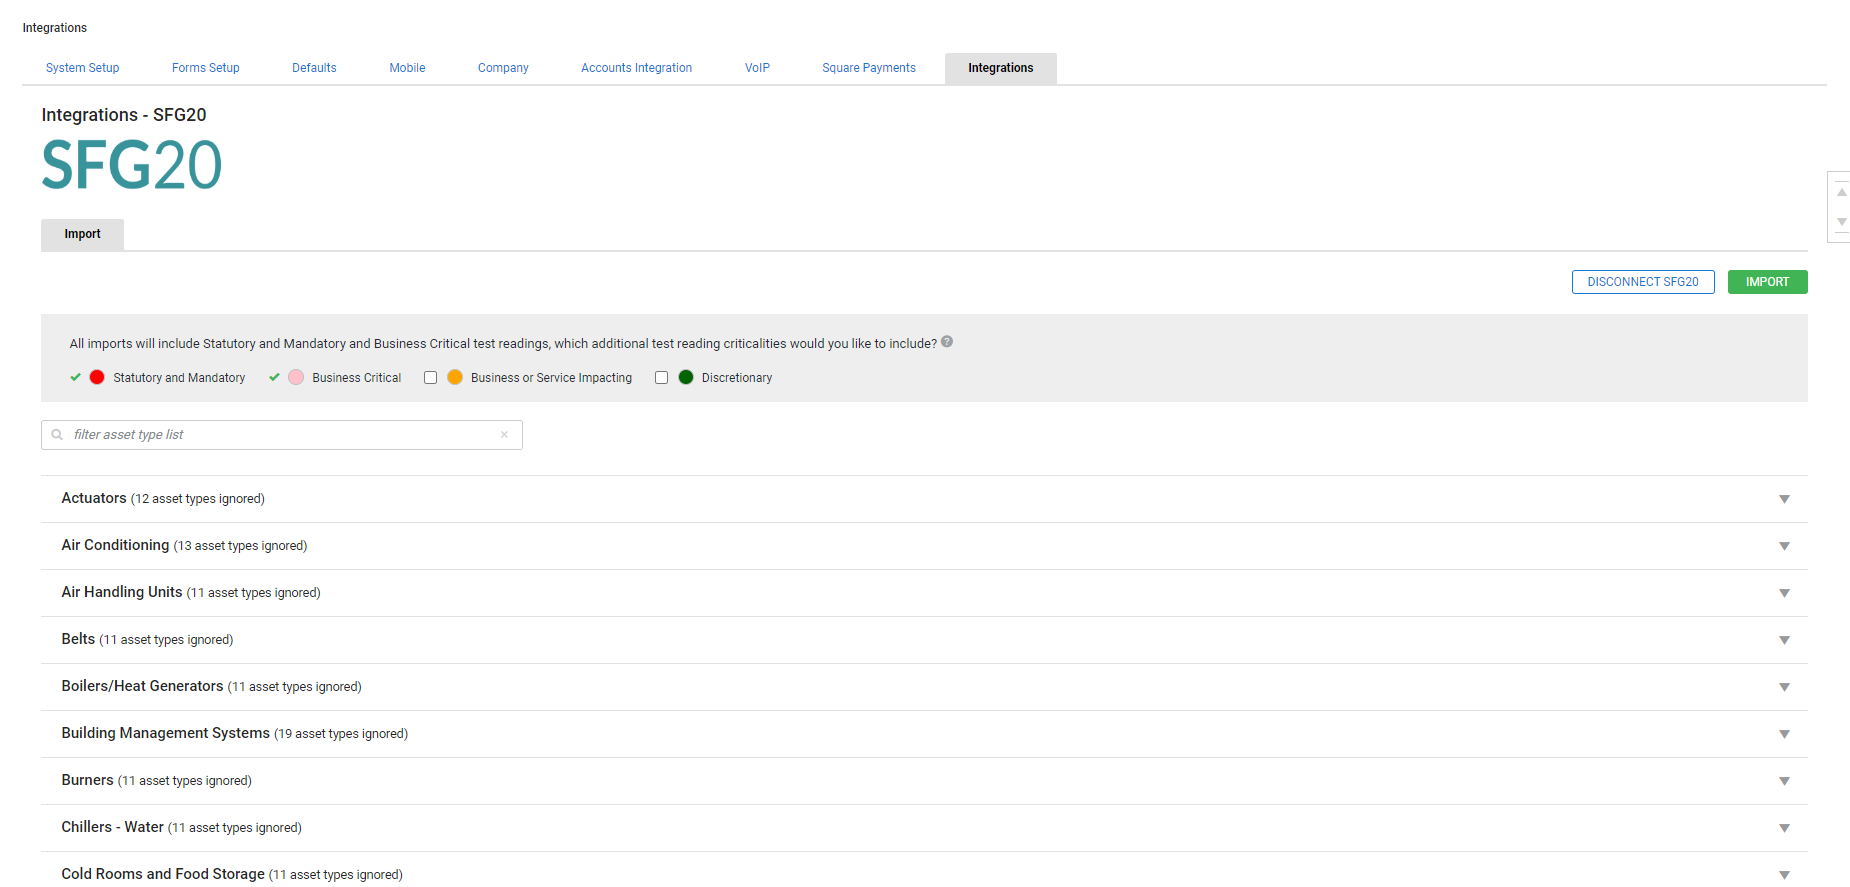 A screenshot of the SFG20 integration page.